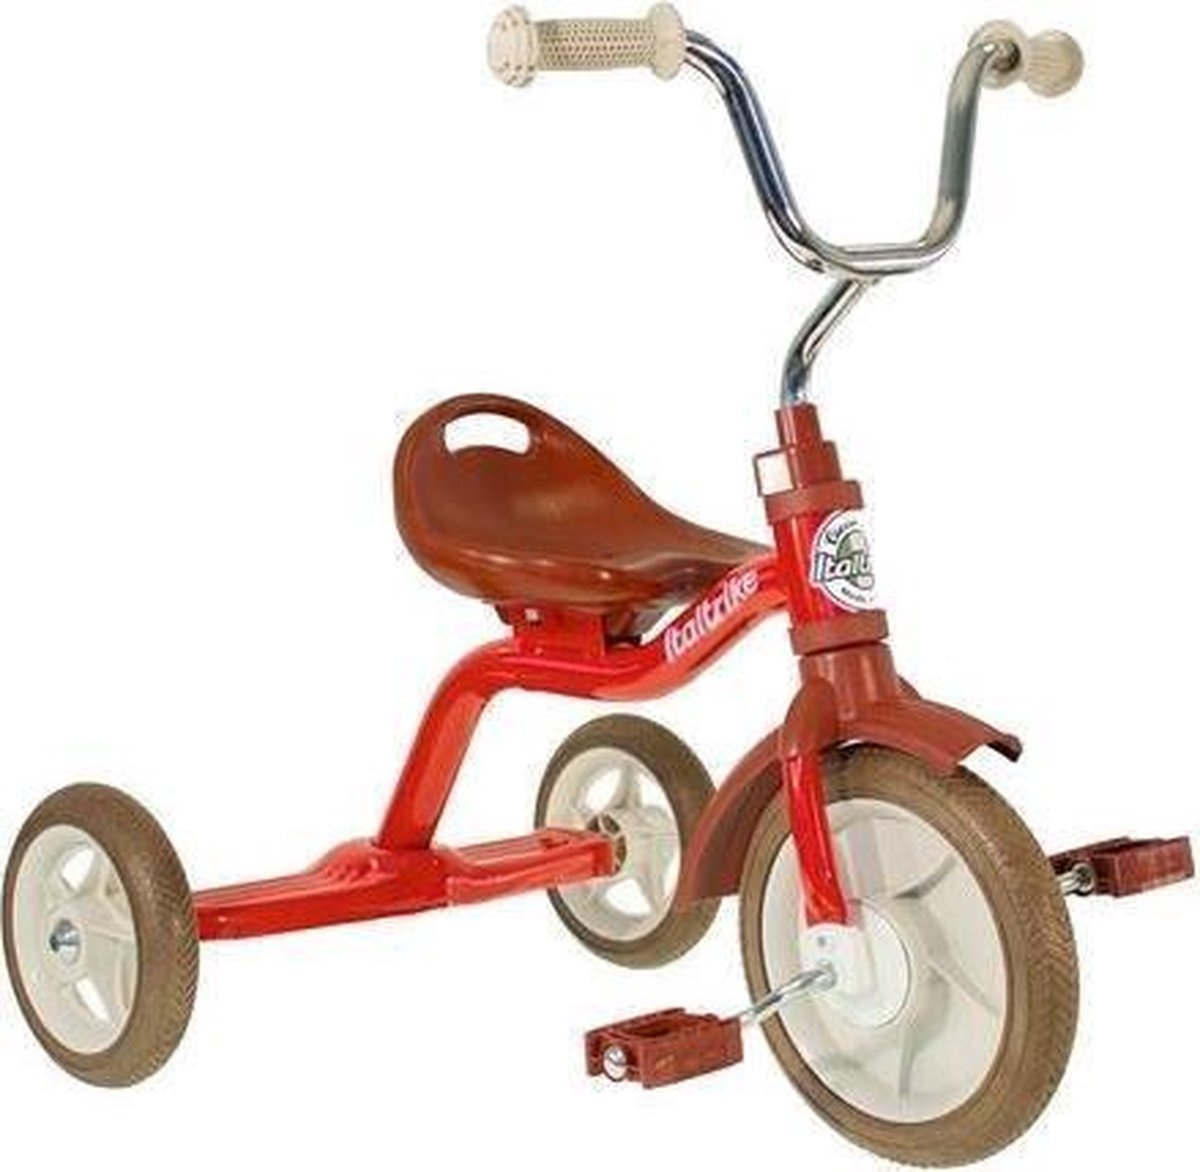 Italtrike driewieler Italtrike Touring Tricycle Champion Driewieler en rood